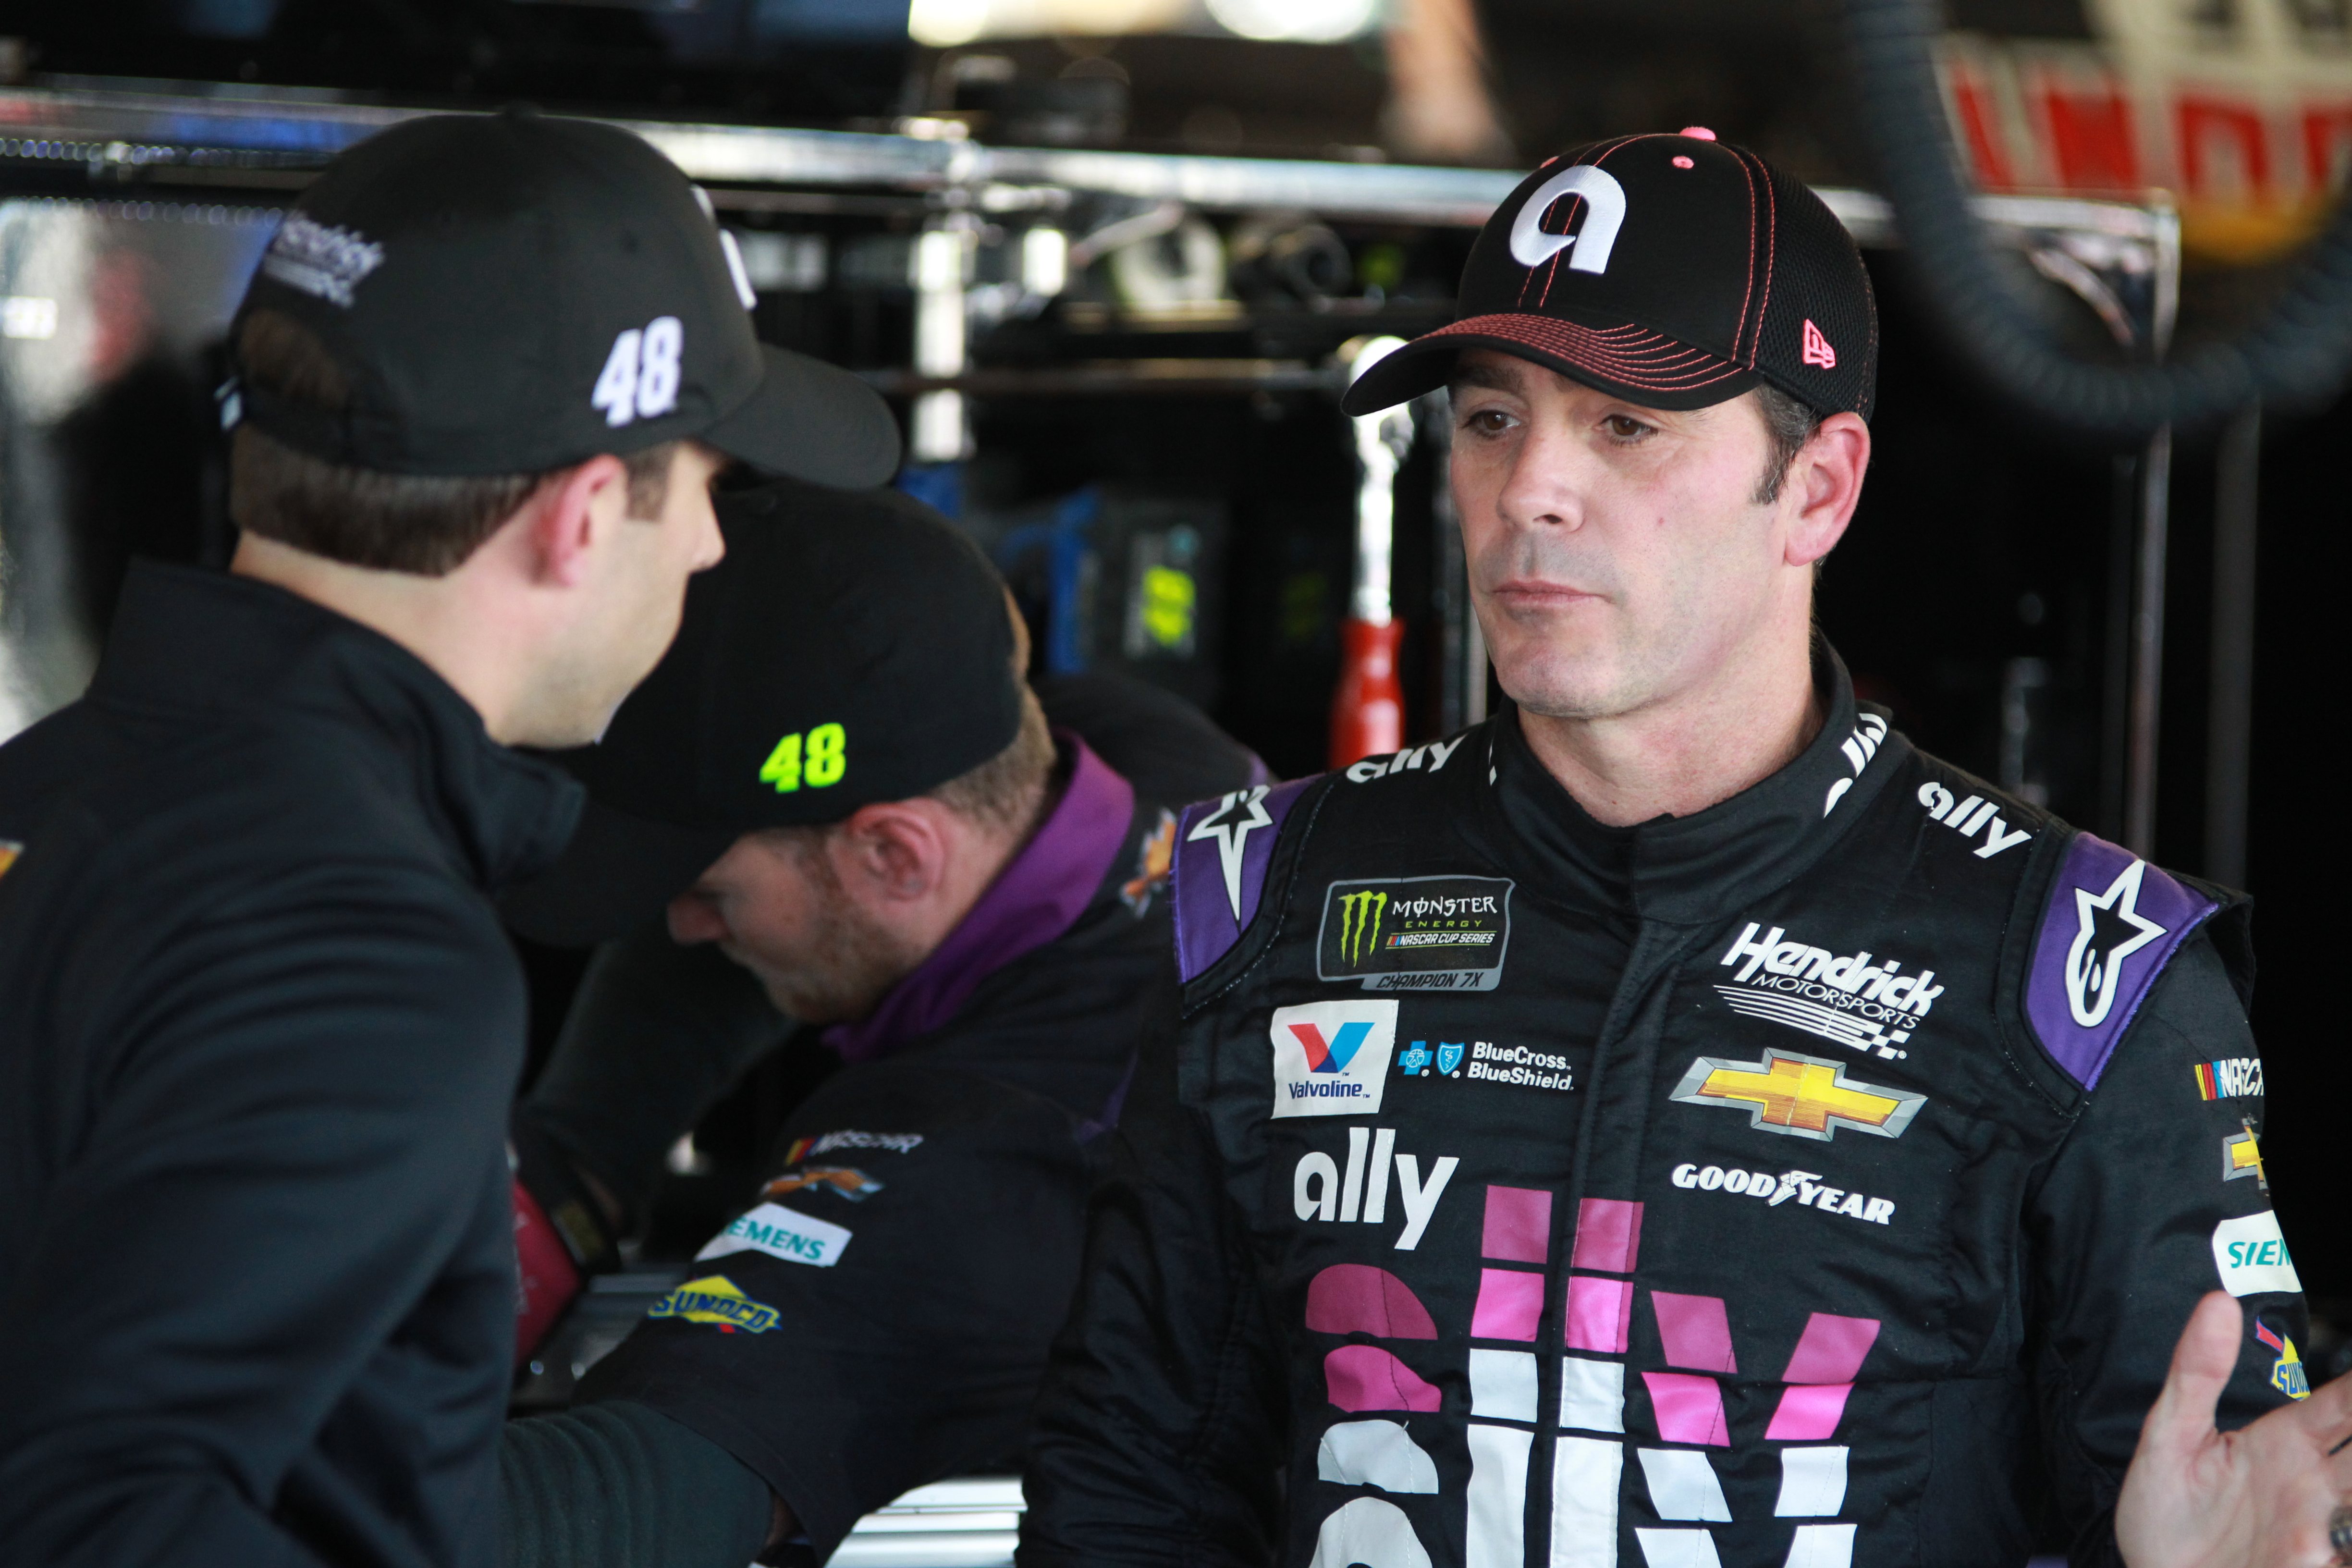 Conversely, Johnson embraced the return of Cliff Daniels as his new crew chief. (Photo Credit: Stephen Conley/TPF)